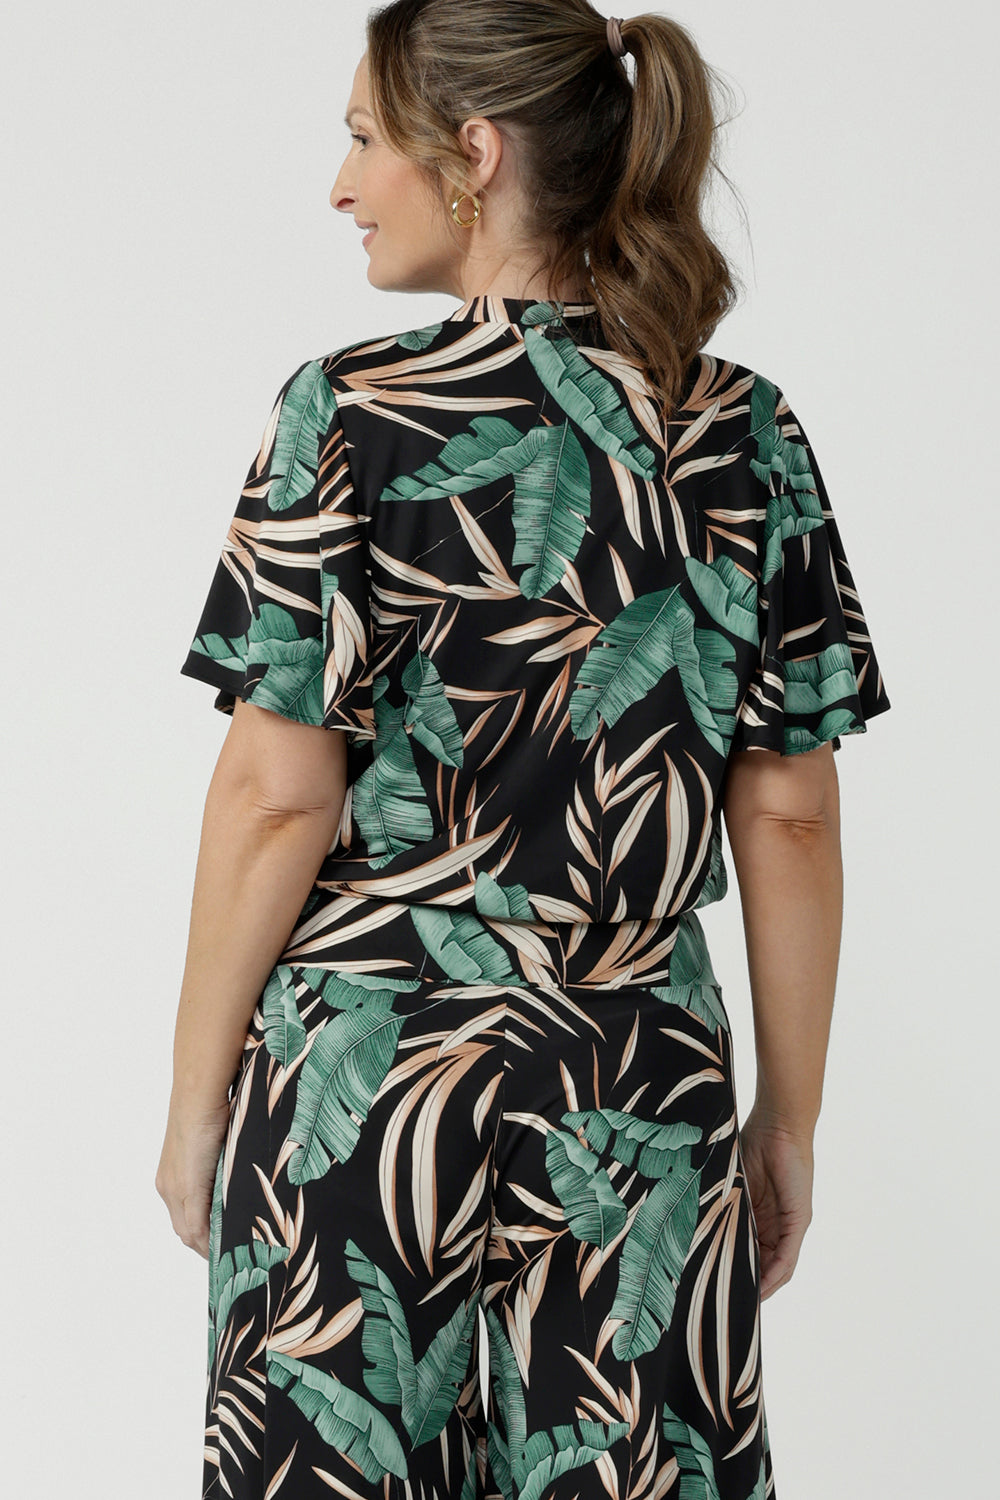 Tropical printed shrug cardigan. Featuring a leaf print on a black background. Ruched waist tie detail tie detail. Great layering piece. Ladies inclusive sizing. Size 8 pictured. 